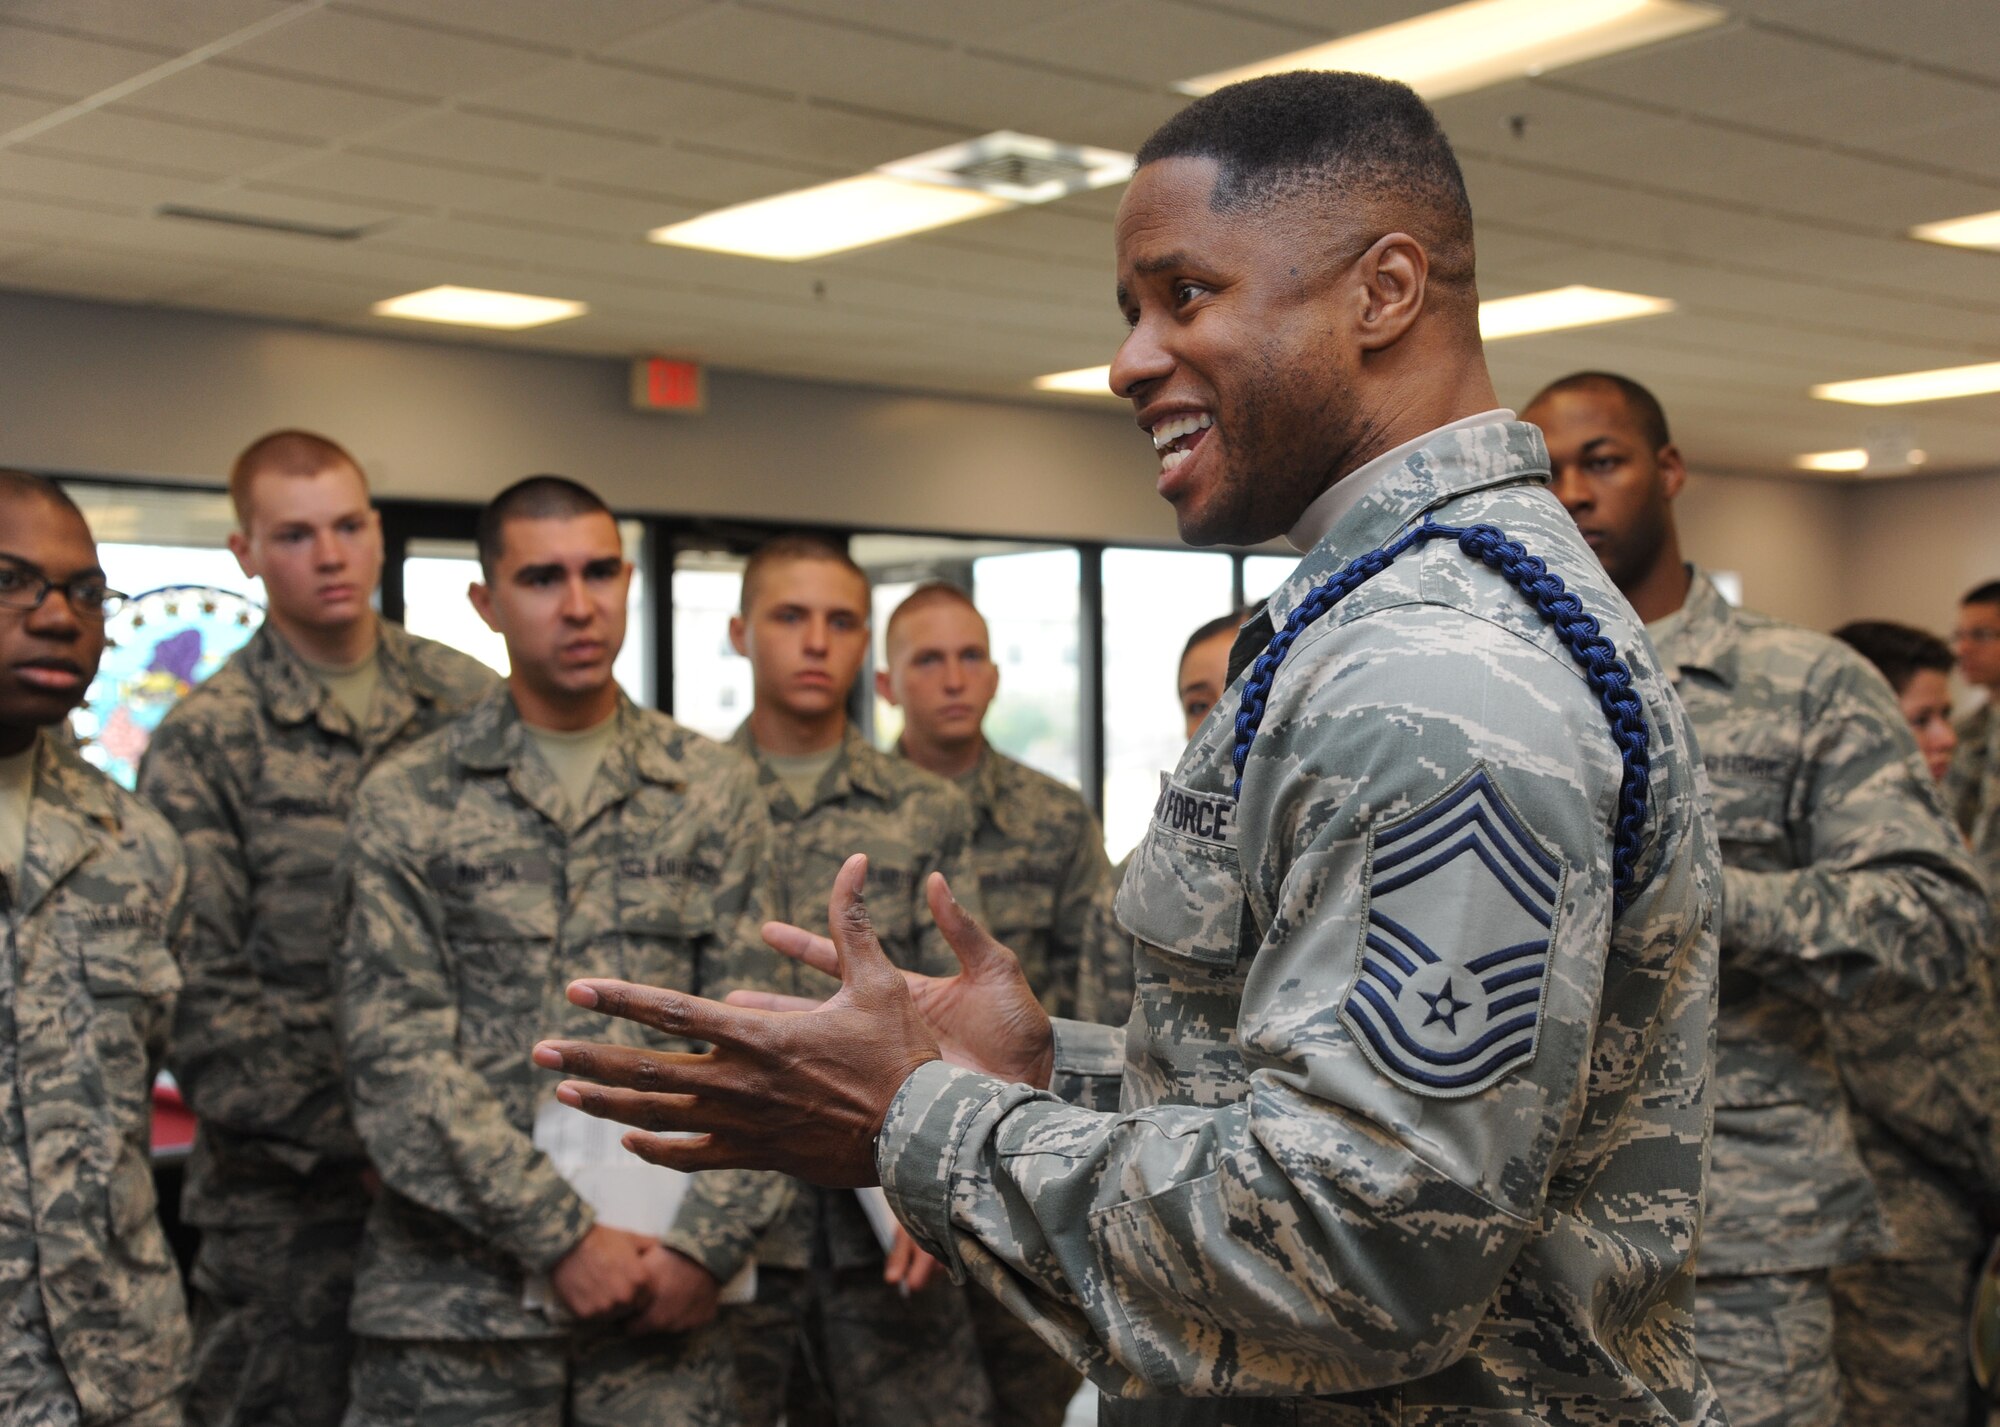 Chief Master Sgt. Roderick Cunningham, Air Force Reserves Center, speaks to Keesler technical training students about the Air Guard, National Guard and Reserve units and what they have to offer during the “Right Start” program Feb. 14, 2014, at the Levitow Training Support Facility, Keesler Air Force Base, Miss.  The “Right Start” program, which replaced seven hours of power point briefings, is an interactive program that allows the Airmen to get direct information from base support and morale agencies. (U.S. Air Force photo by Kemberly Groue)